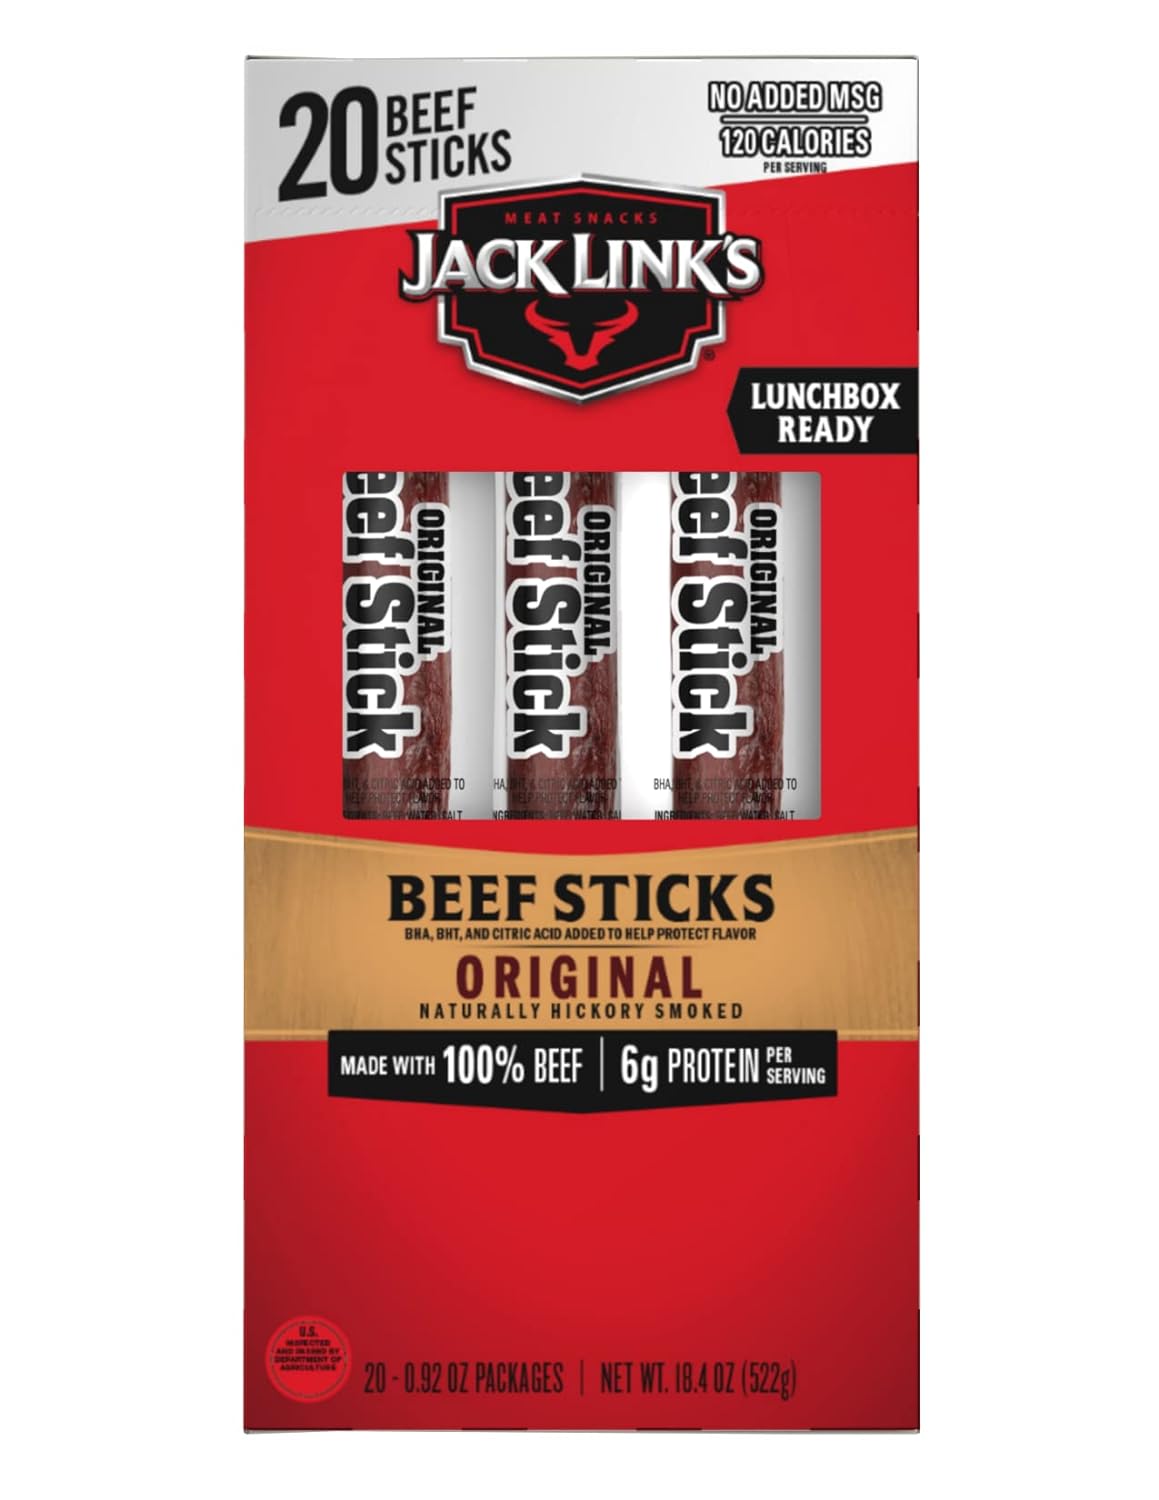 20-Count 0.92-Oz. Jack Link's Protein Snack Beef Sticks (Original) $7.51 w/ S&S + Free Shipping w/ Prime or on $35+